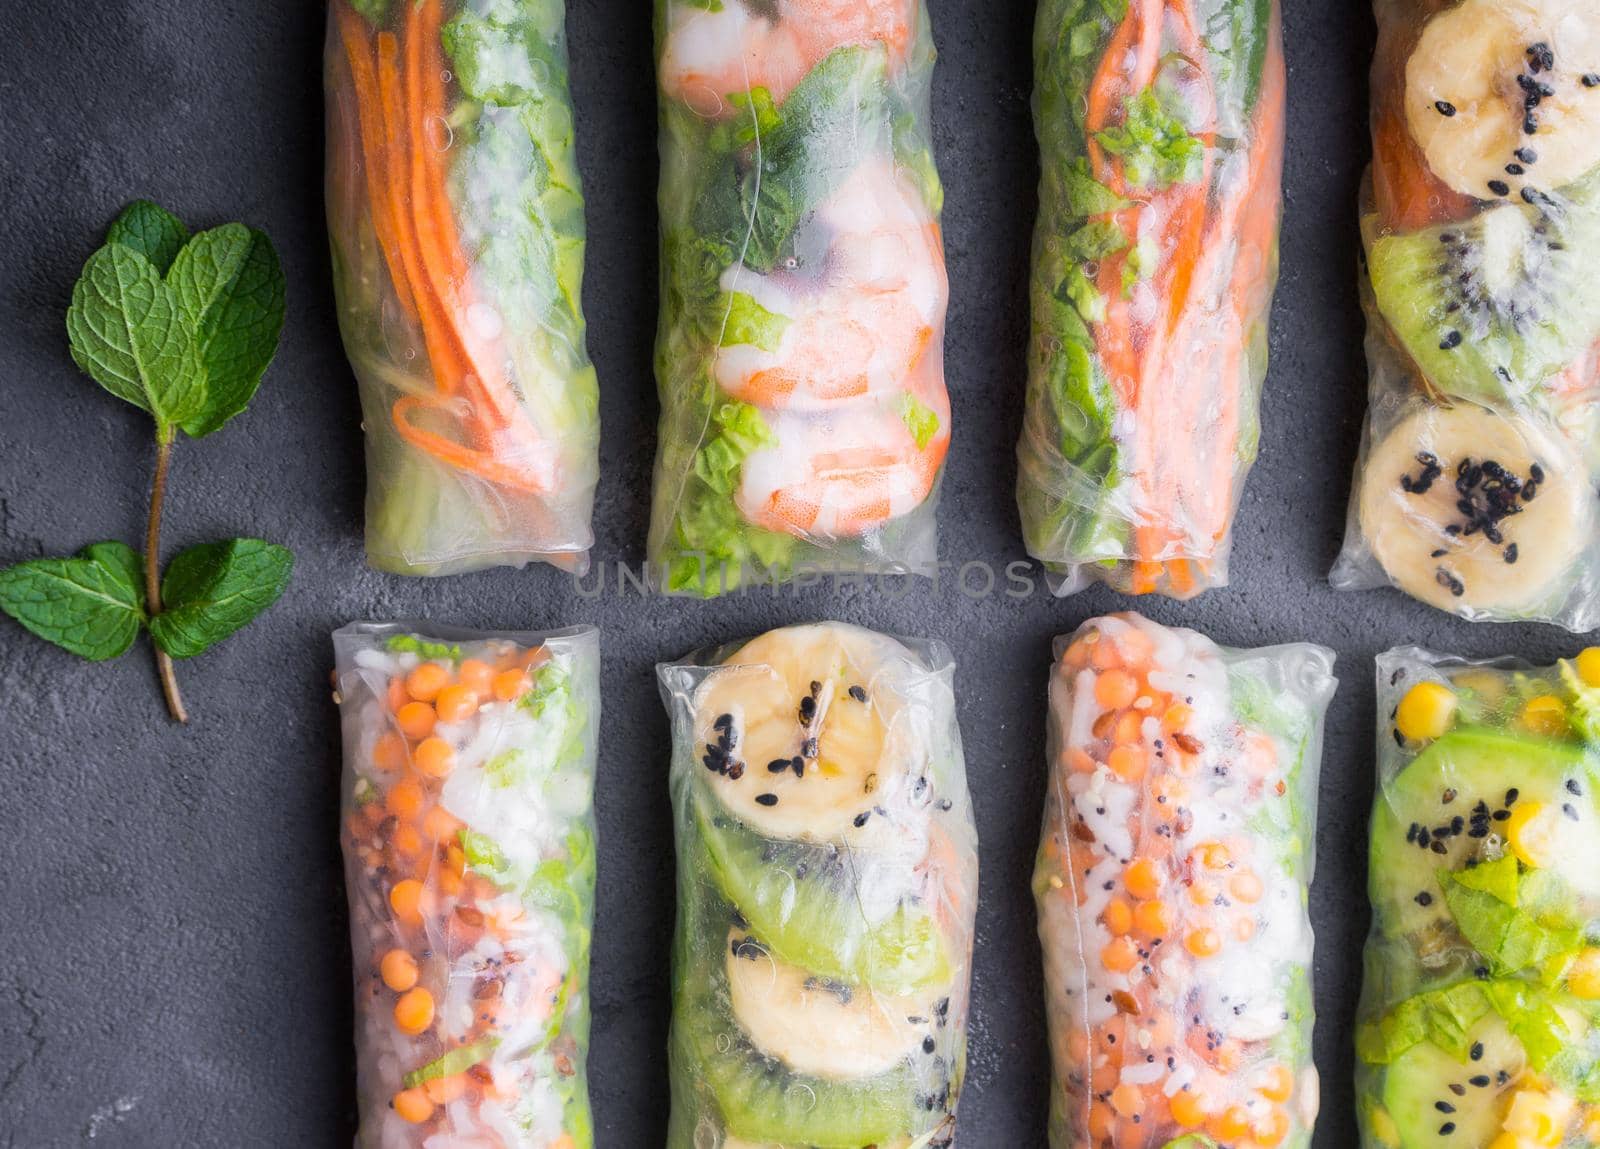 Fresh assorted spring rolls set. Handmade asian/Chinese spring rolls. Rustic concrete background. Spring rolls with shrimps, vegetables, fruits. Top view. Healthy asian food. Lunch/snacks/buffet